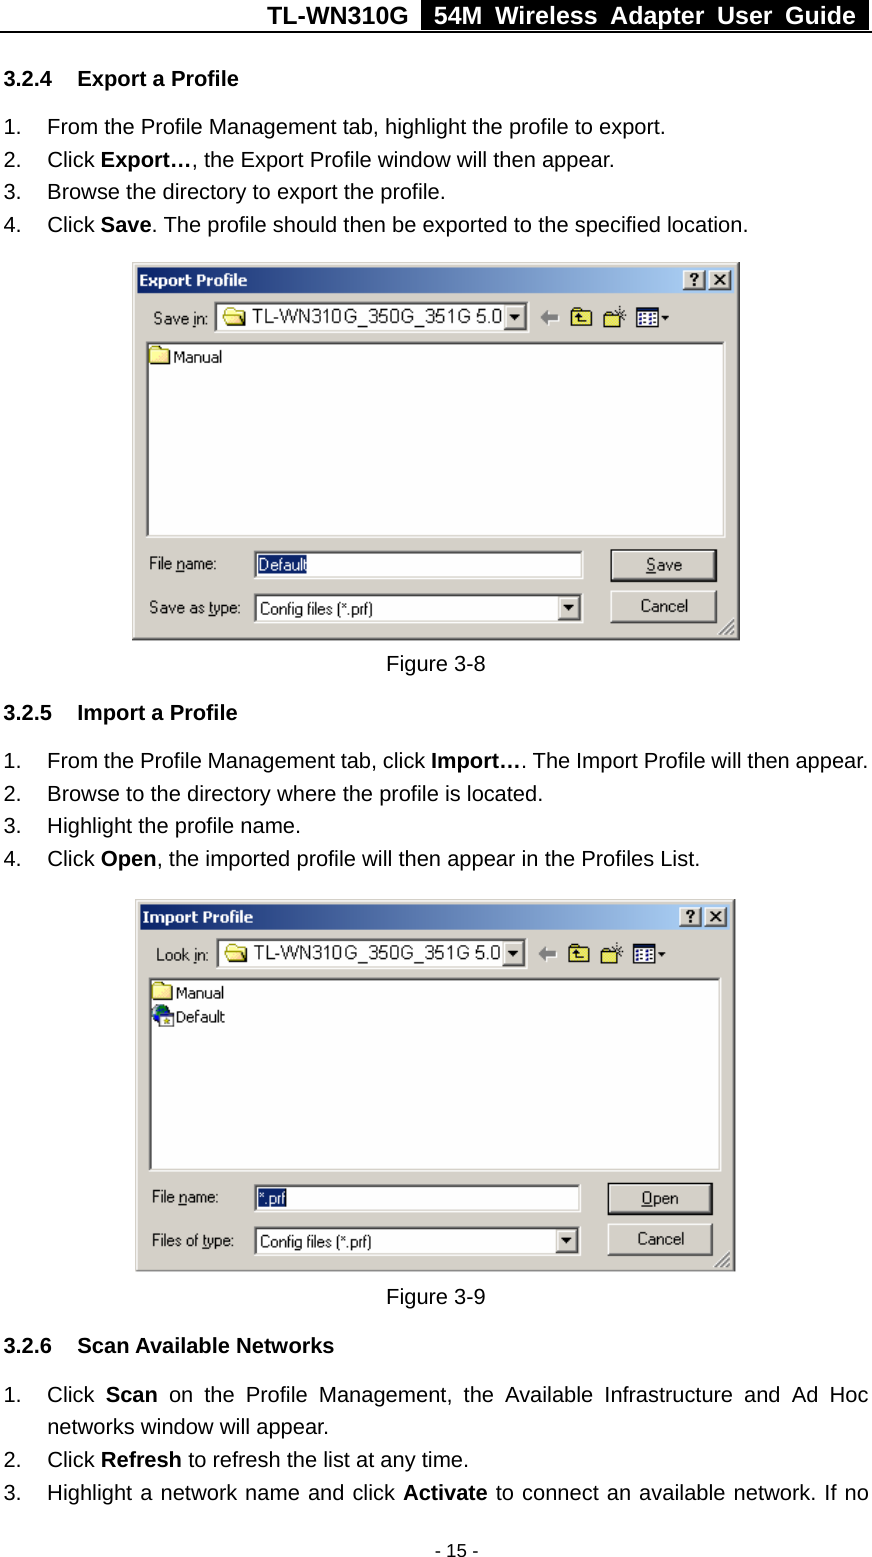 TL-WN310G   54M Wireless Adapter User Guide   - 15 -3.2.4  Export a Profile 1.  From the Profile Management tab, highlight the profile to export. 2. Click Export…, the Export Profile window will then appear. 3.  Browse the directory to export the profile. 4. Click Save. The profile should then be exported to the specified location.  Figure 3-8   3.2.5  Import a Profile 1.  From the Profile Management tab, click Import…. The Import Profile will then appear. 2.  Browse to the directory where the profile is located. 3.  Highlight the profile name. 4. Click Open, the imported profile will then appear in the Profiles List.  Figure 3-9   3.2.6 Scan Available Networks 1. Click Scan on the Profile Management, the Available Infrastructure and Ad Hoc networks window will appear. 2. Click Refresh to refresh the list at any time. 3.  Highlight a network name and click Activate to connect an available network. If no 